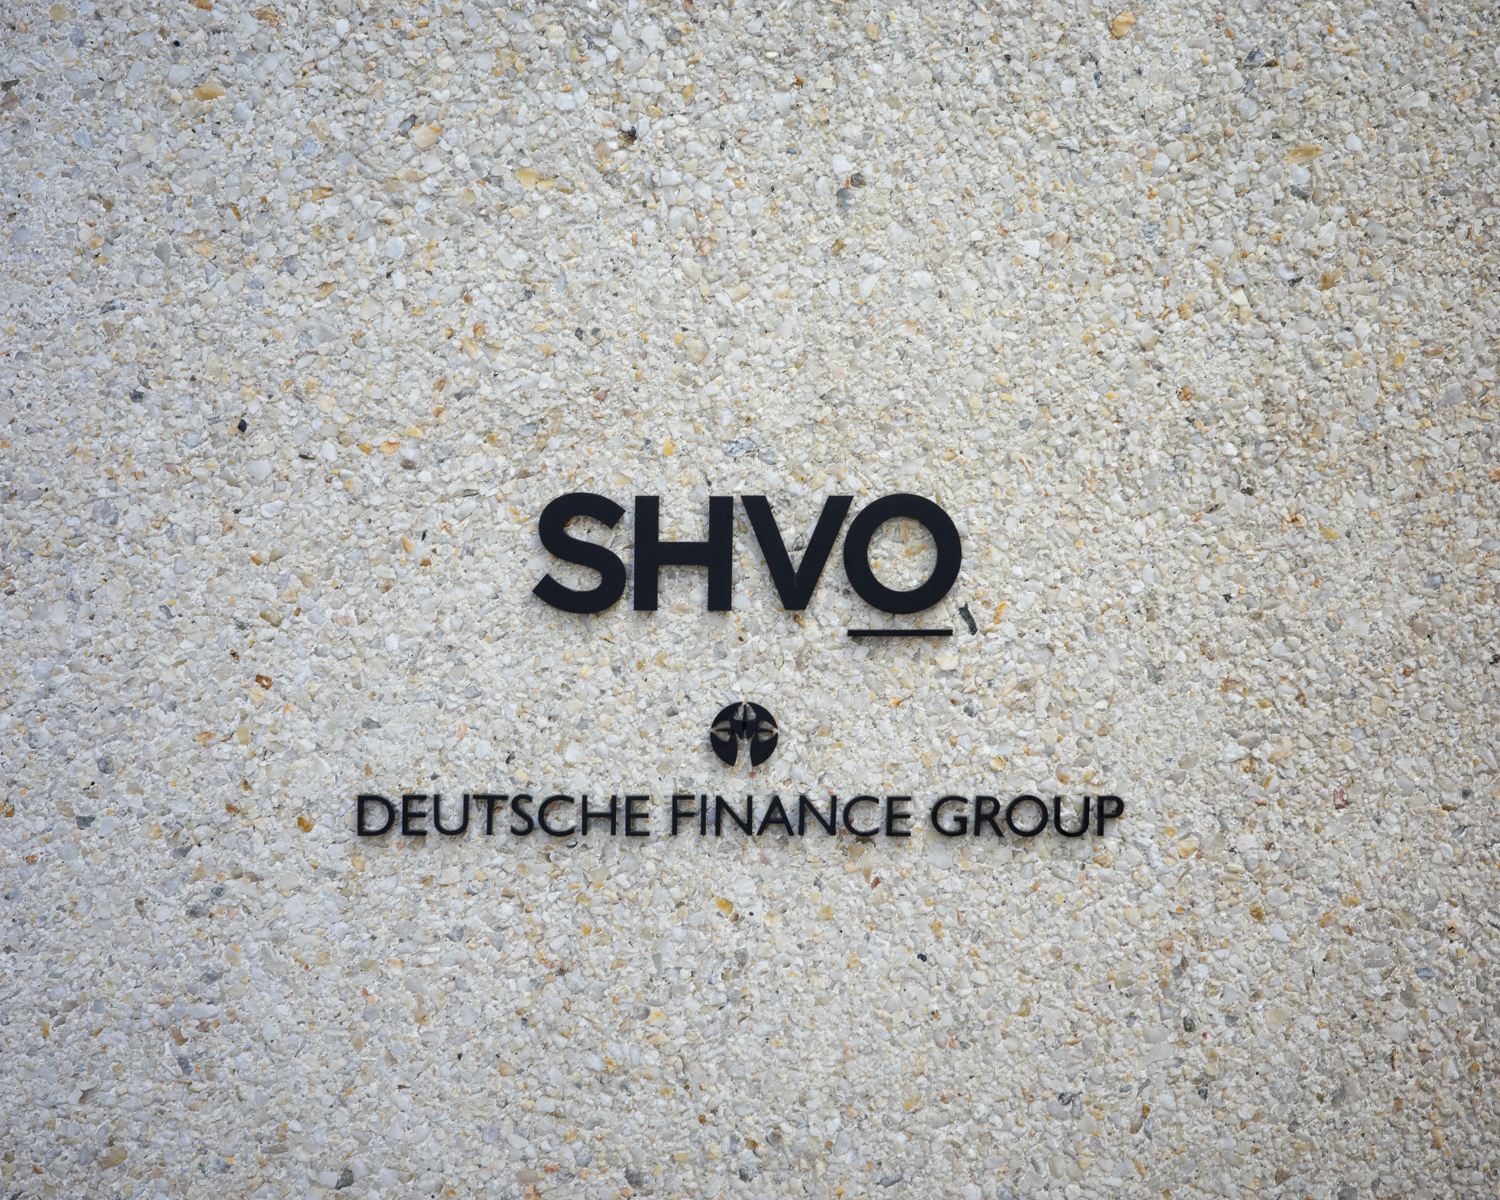 Transamerica Pyramid SHVO and Deutsche Finance Group signage, image by Andrew Campbell Nelson